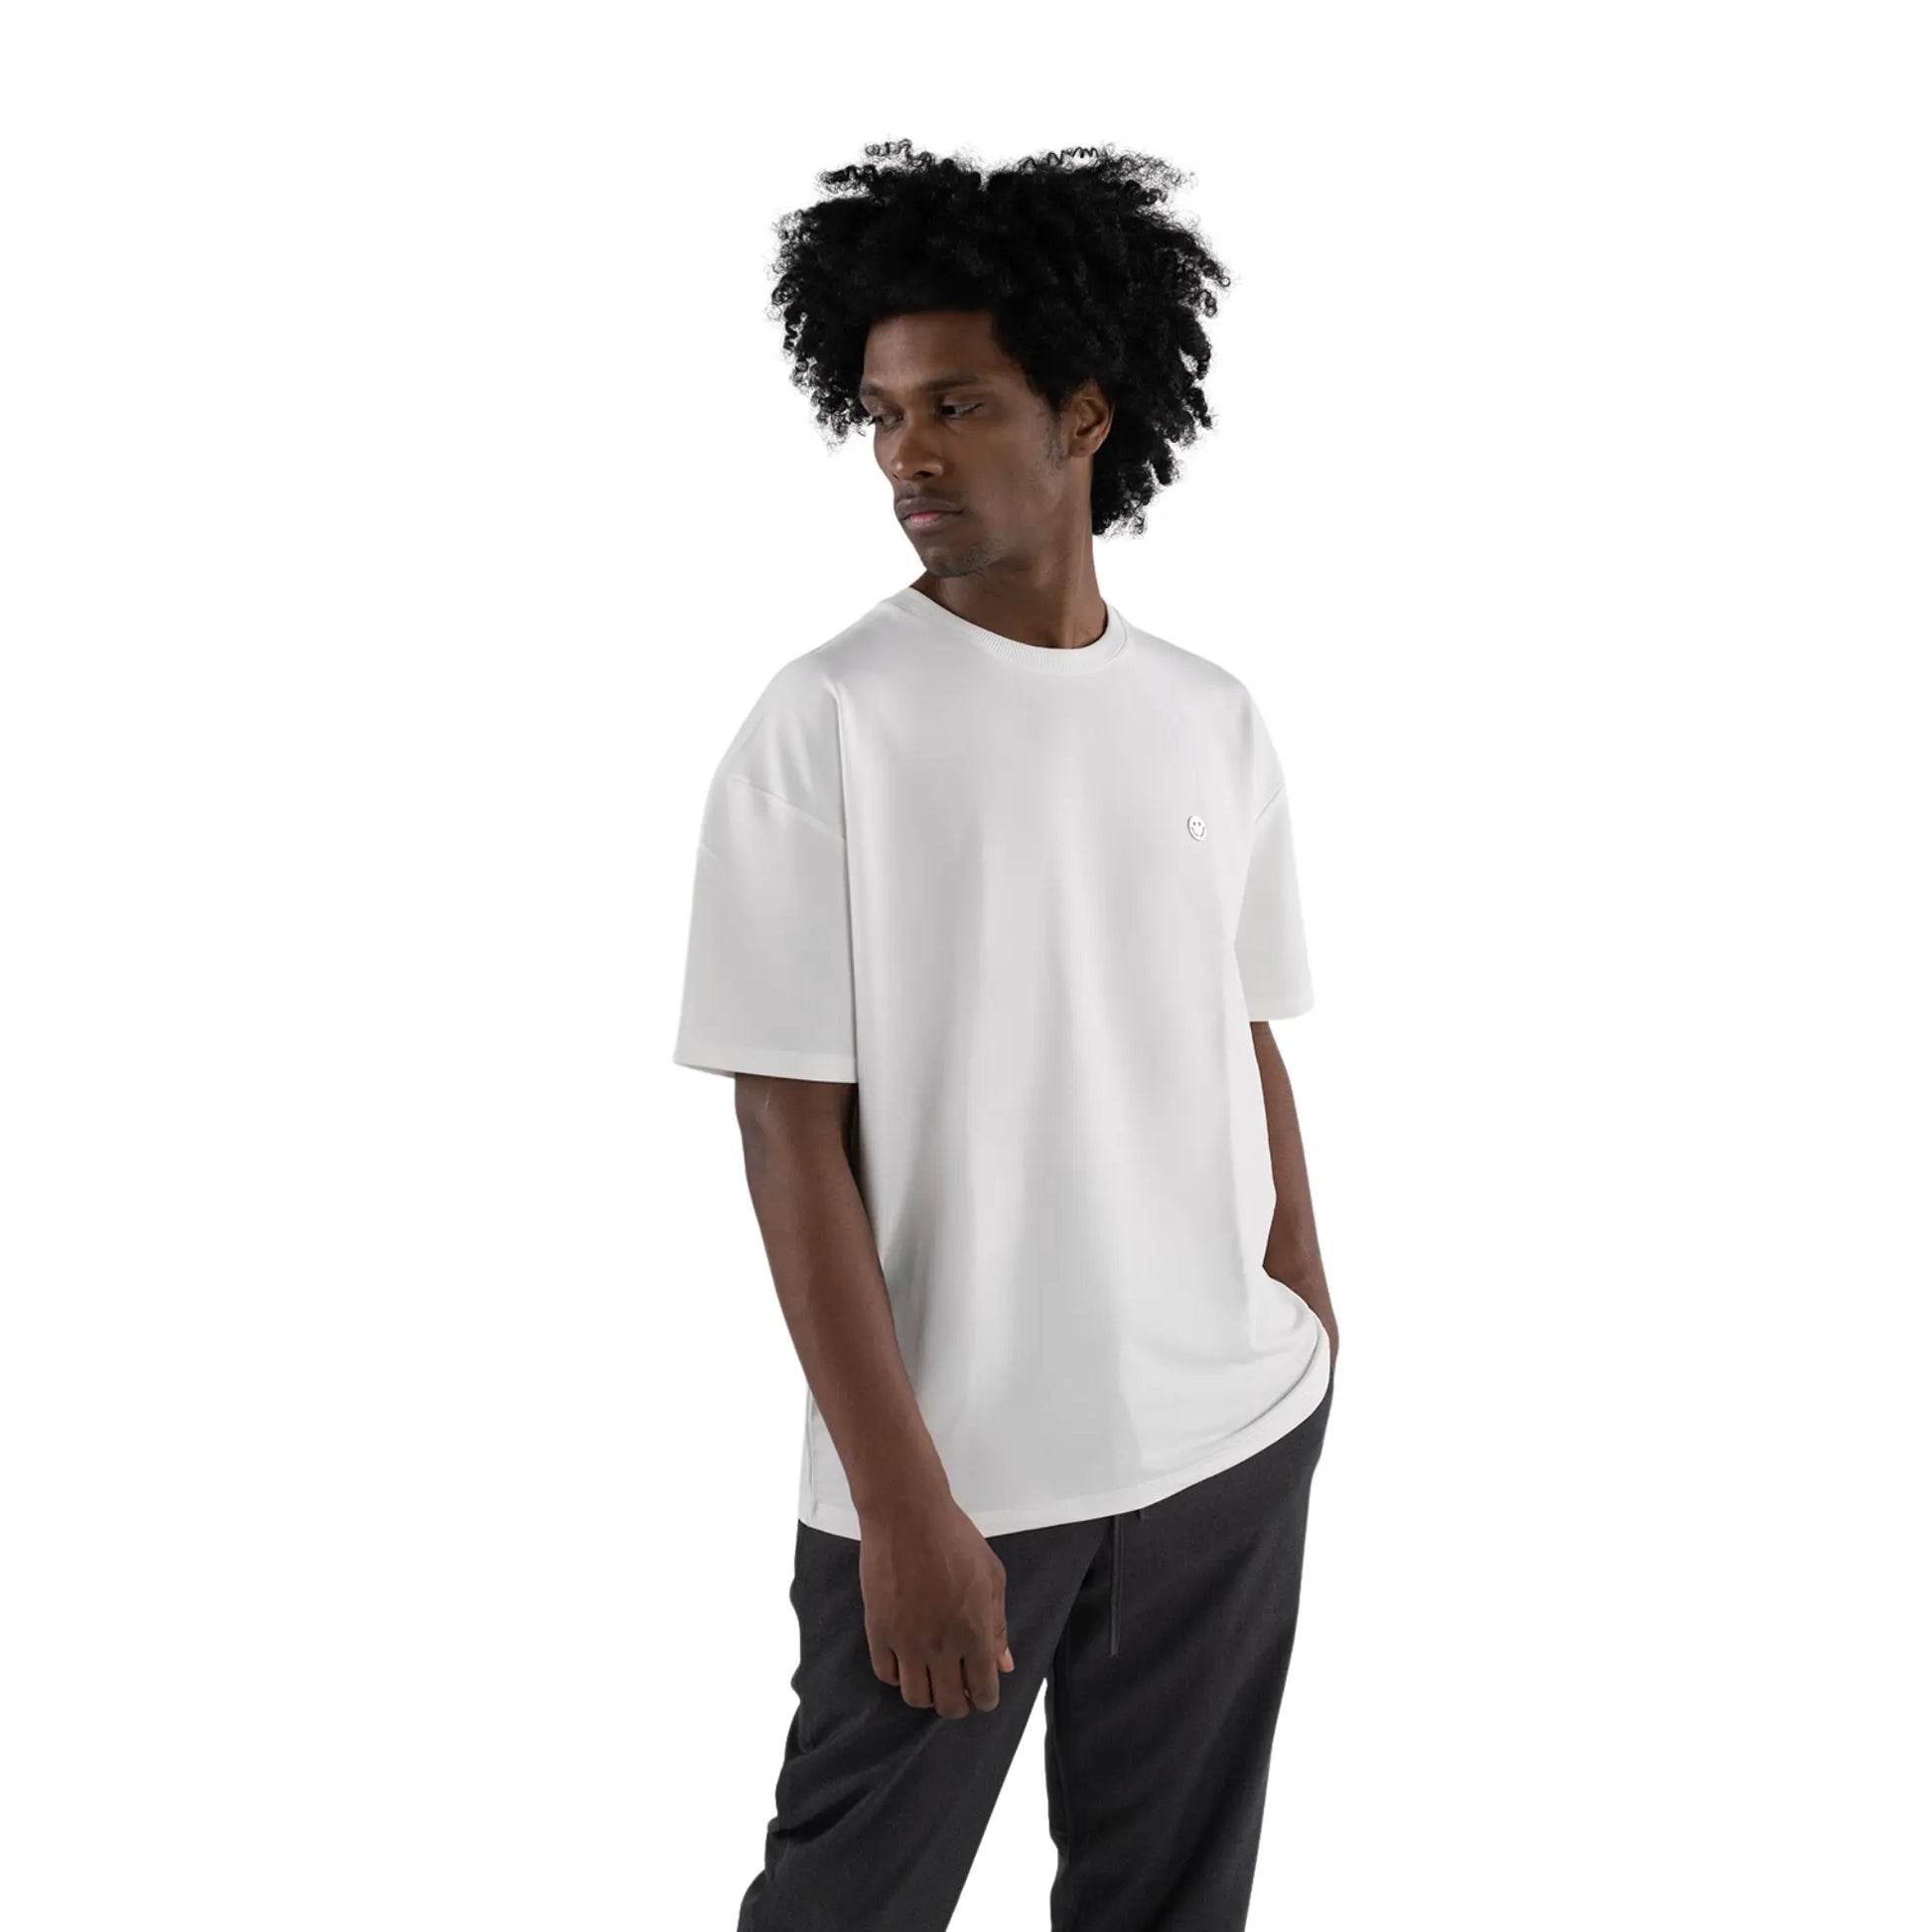 Oversized T-shirt White worn by black man front close up view